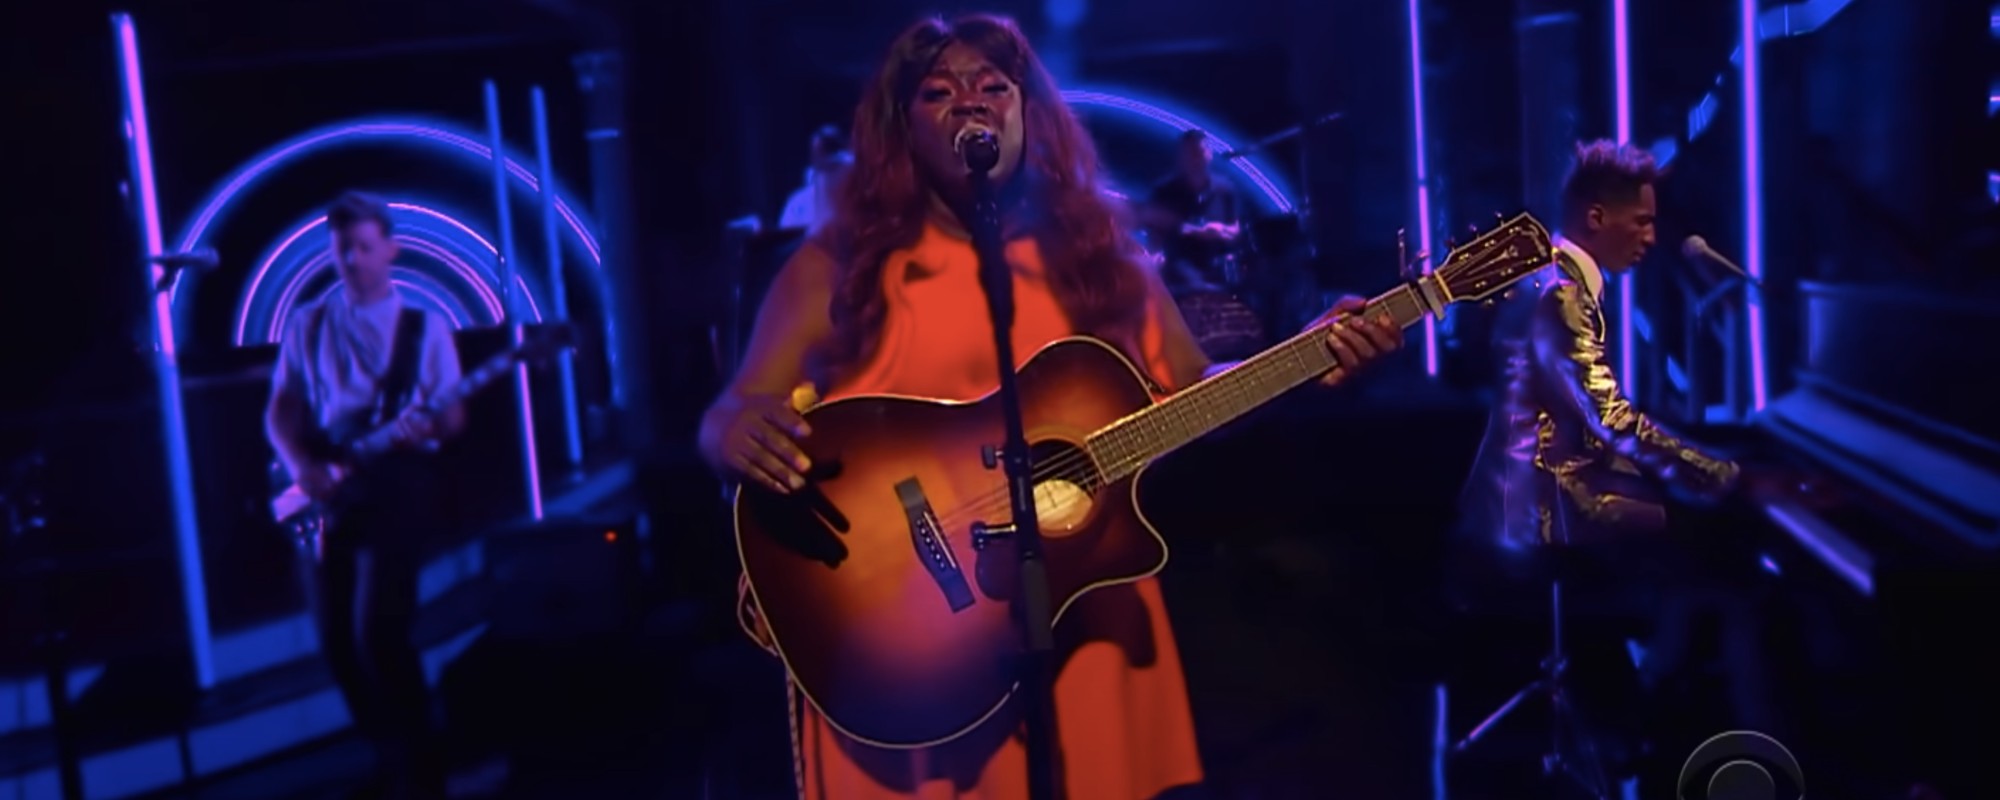 Yola Brings ‘Colbert’ Audience To Their Feet With “Stand For Myself” Performance